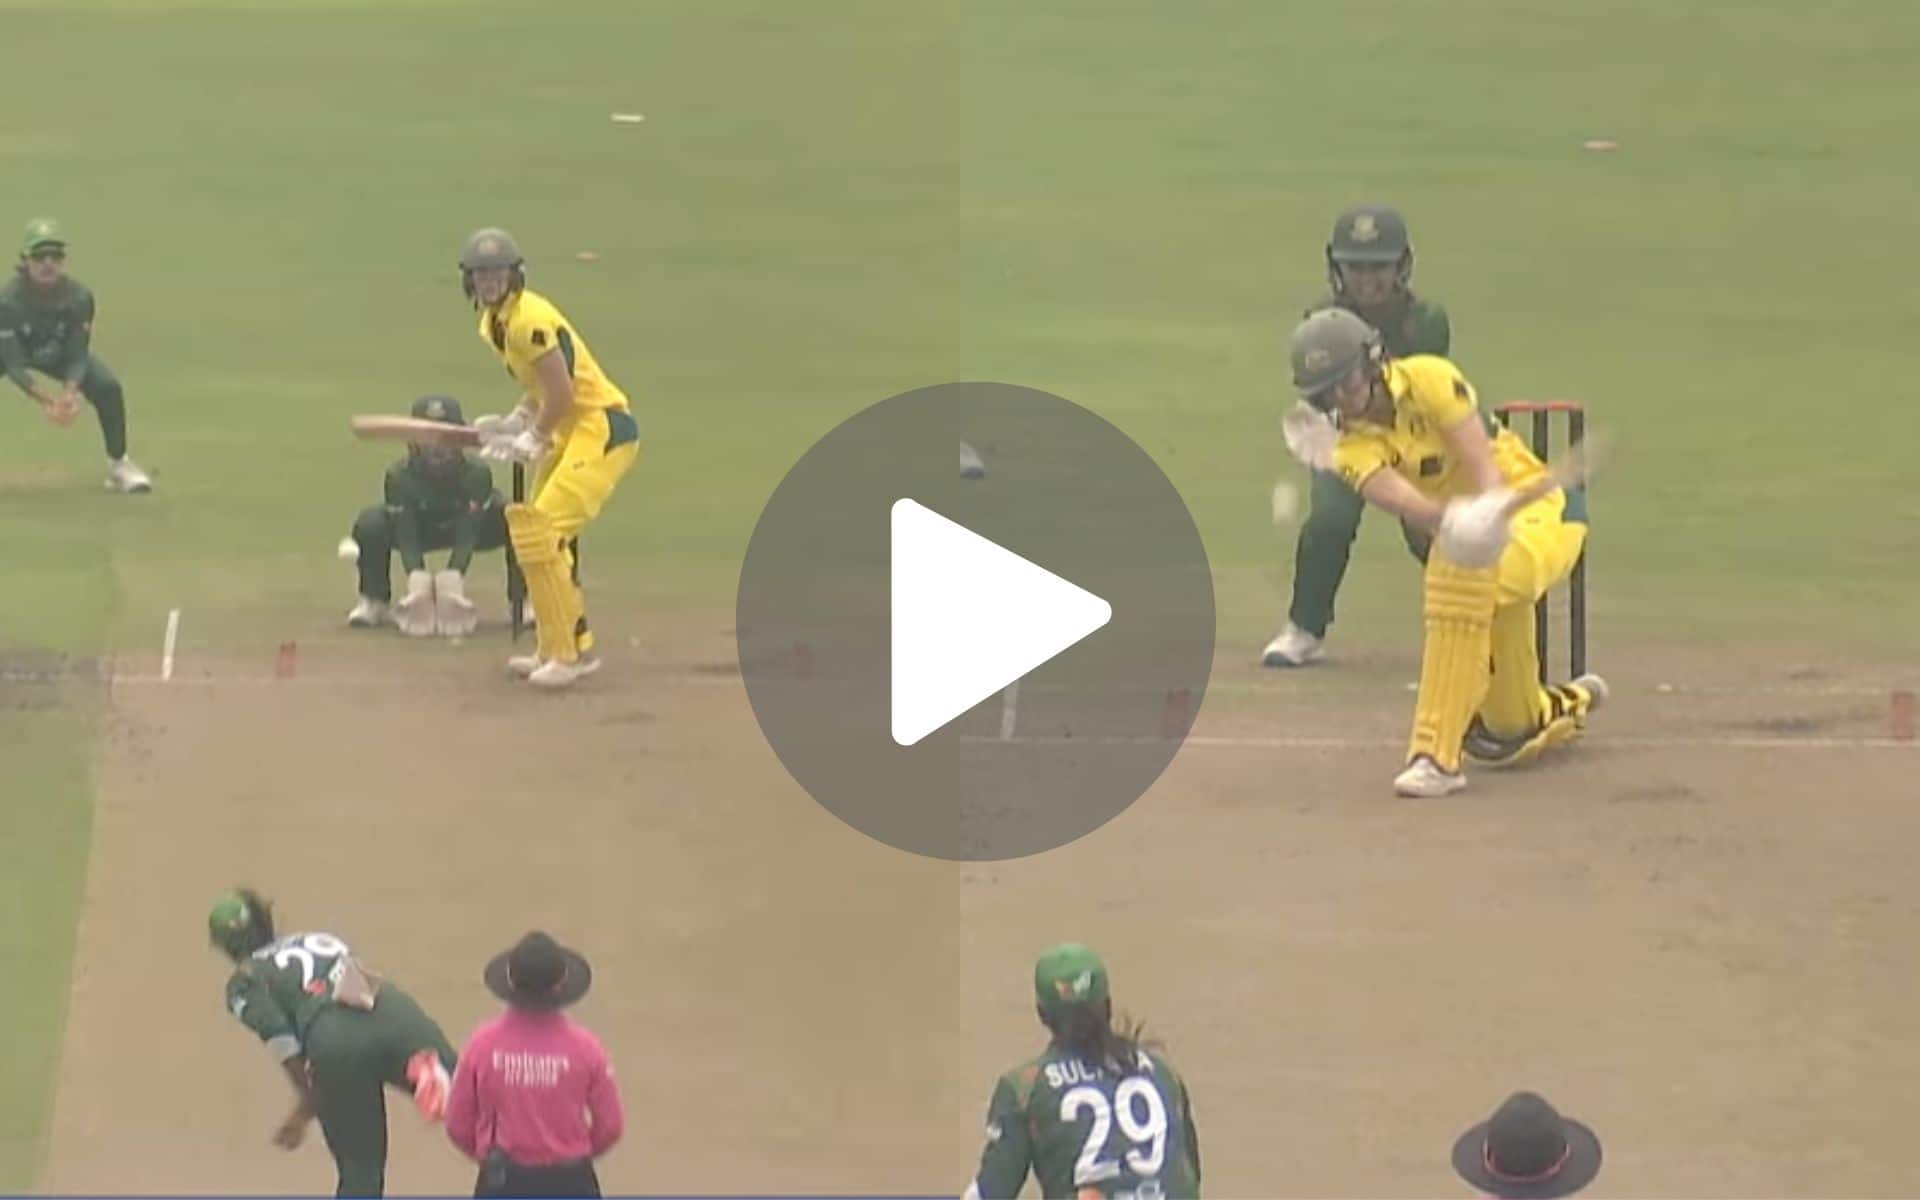 [Watch] No Ellyse Perry Show In Bangladesh As Sultana Khatun Makes Her Bunny